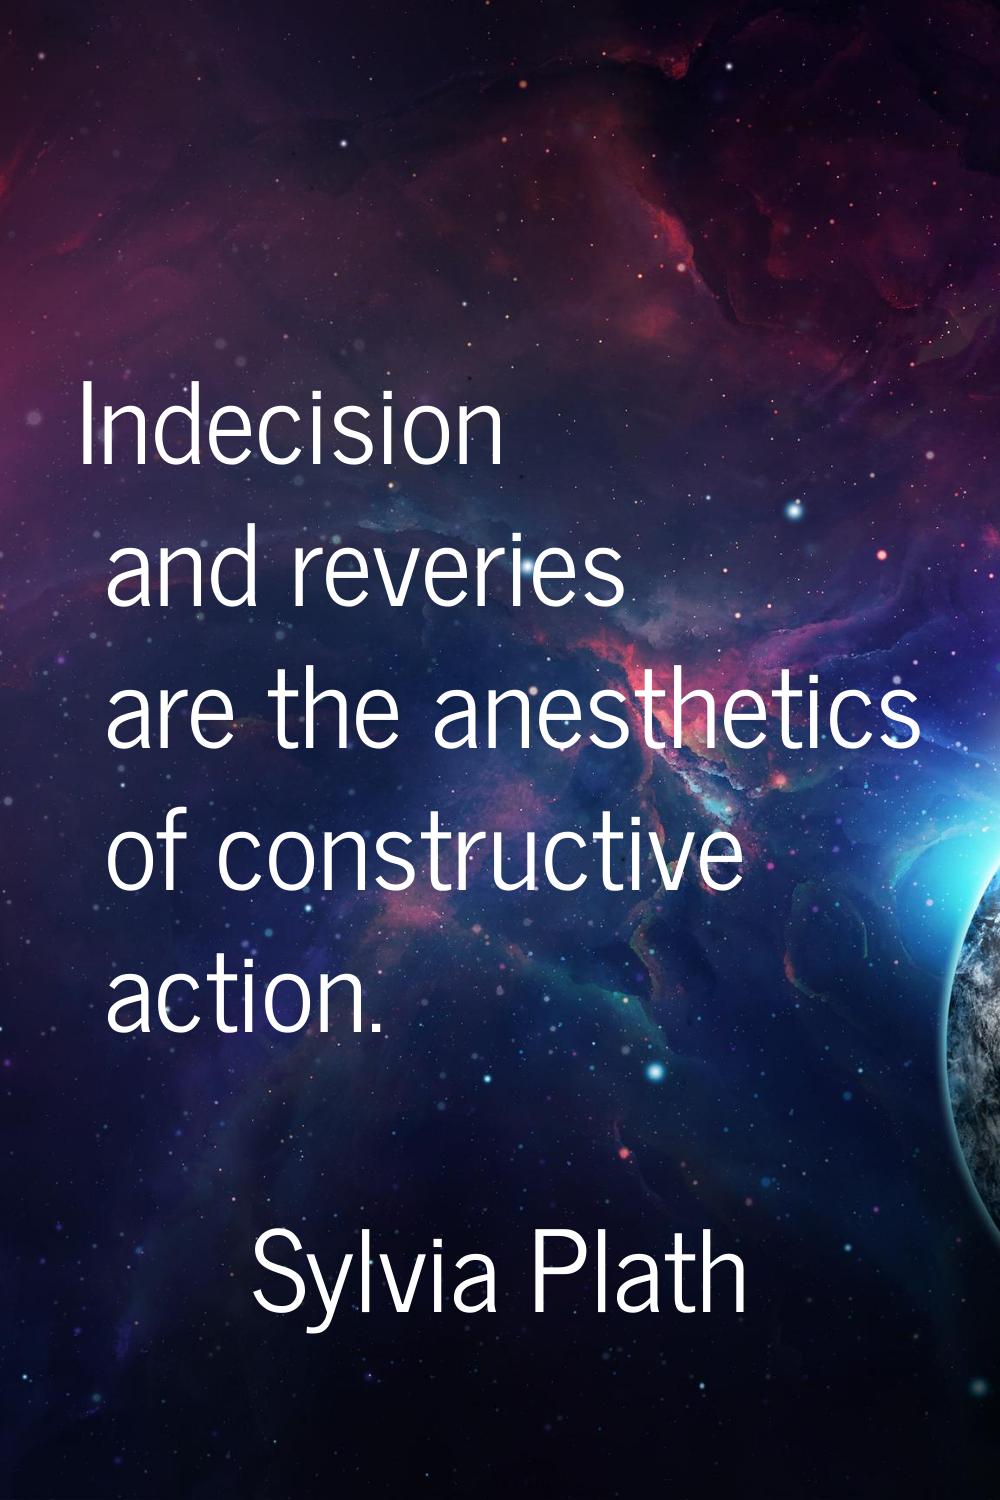 Indecision and reveries are the anesthetics of constructive action.